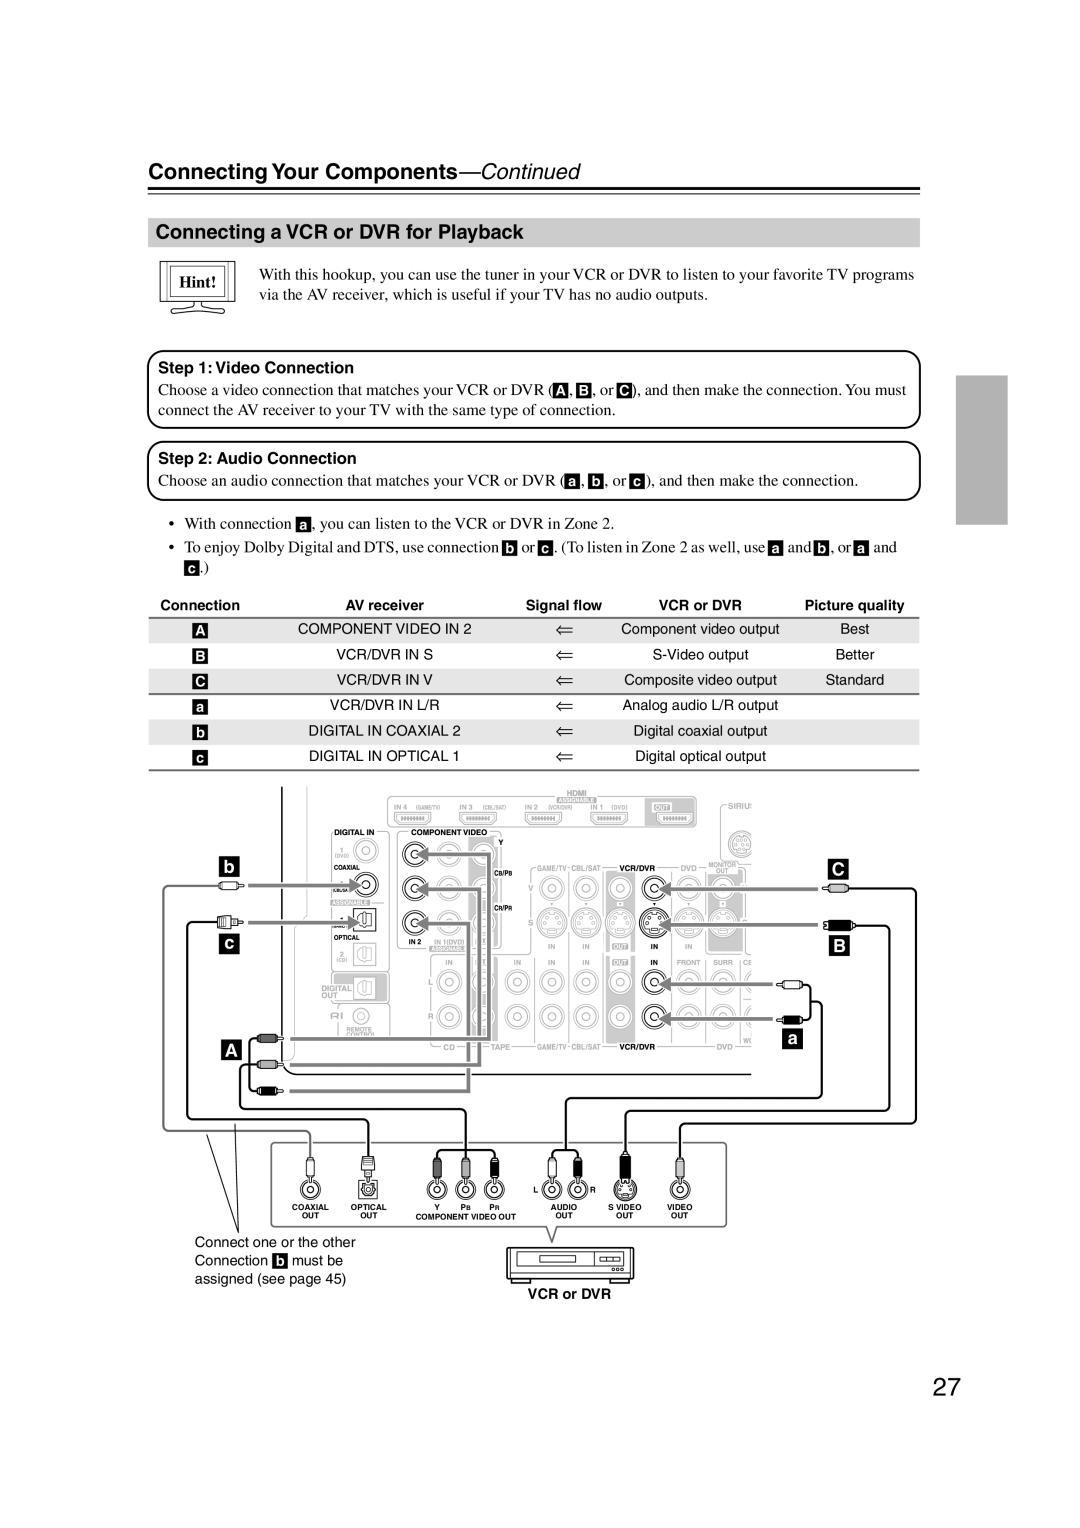 Integra DTR-5.9 instruction manual Connecting a VCR or DVR for Playback, Connecting Your Components—Continued, Hint 